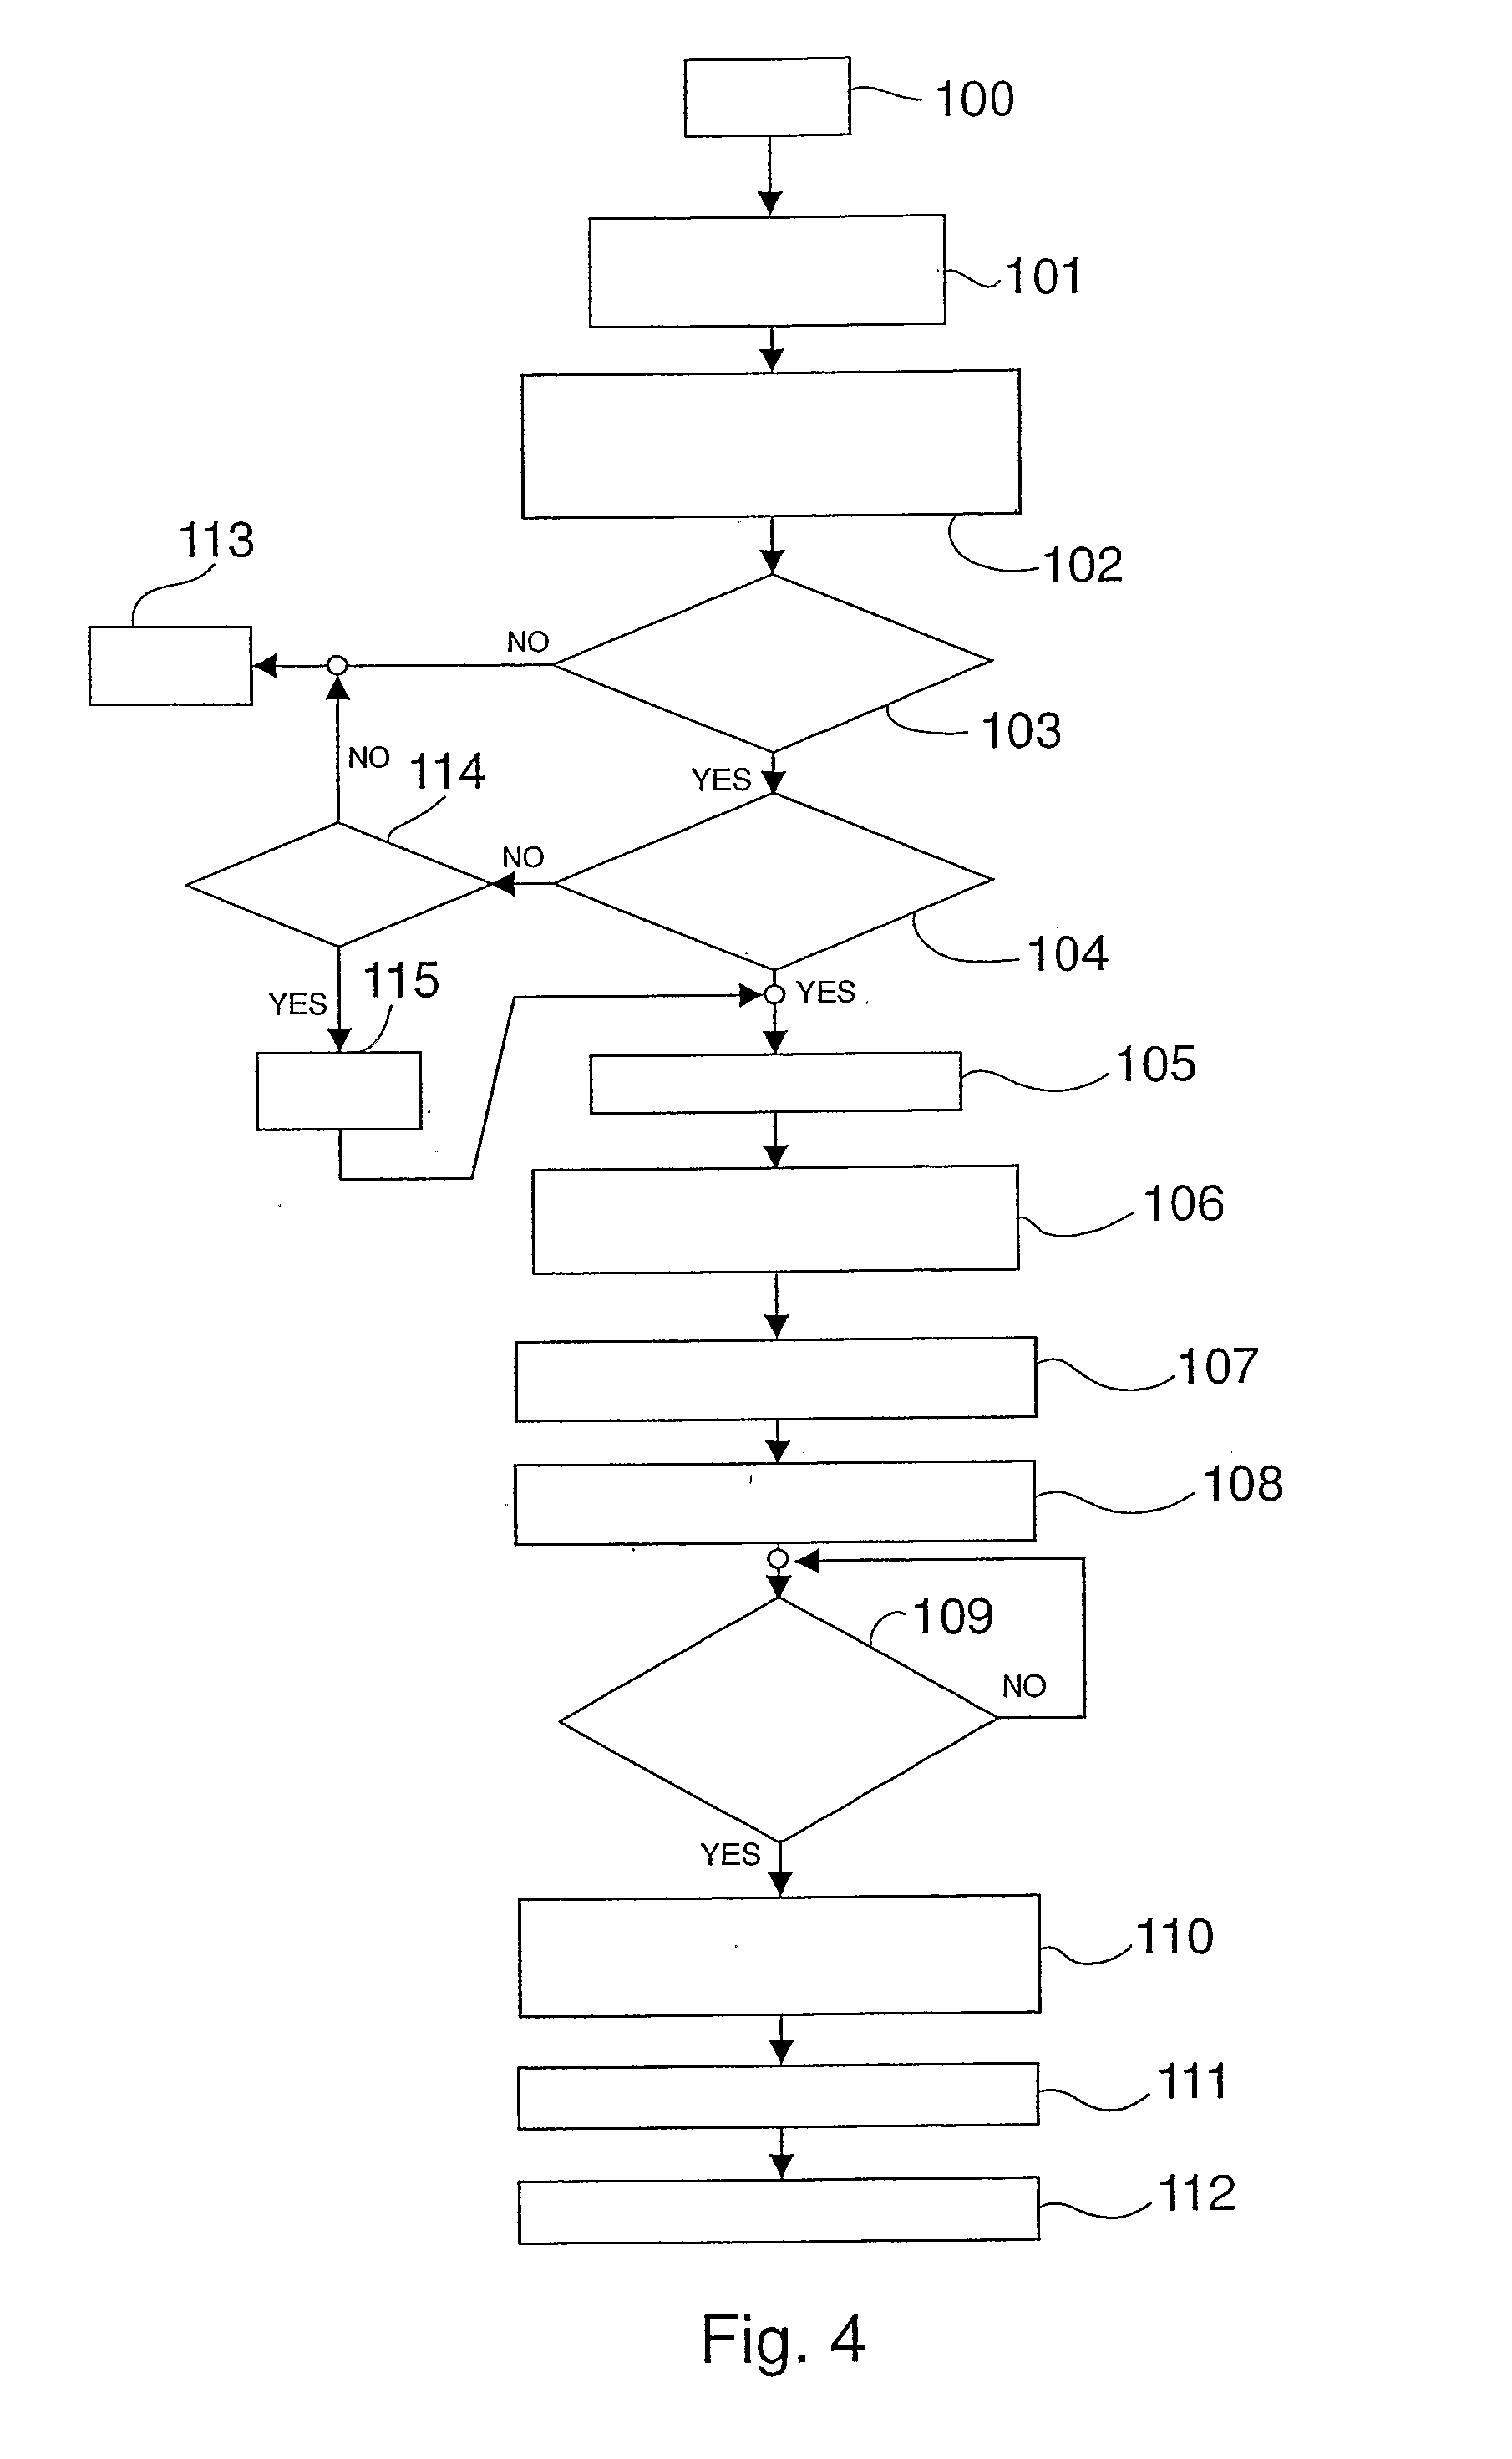 System for and Method of Automating Parking Payment by Using Electronic Tags